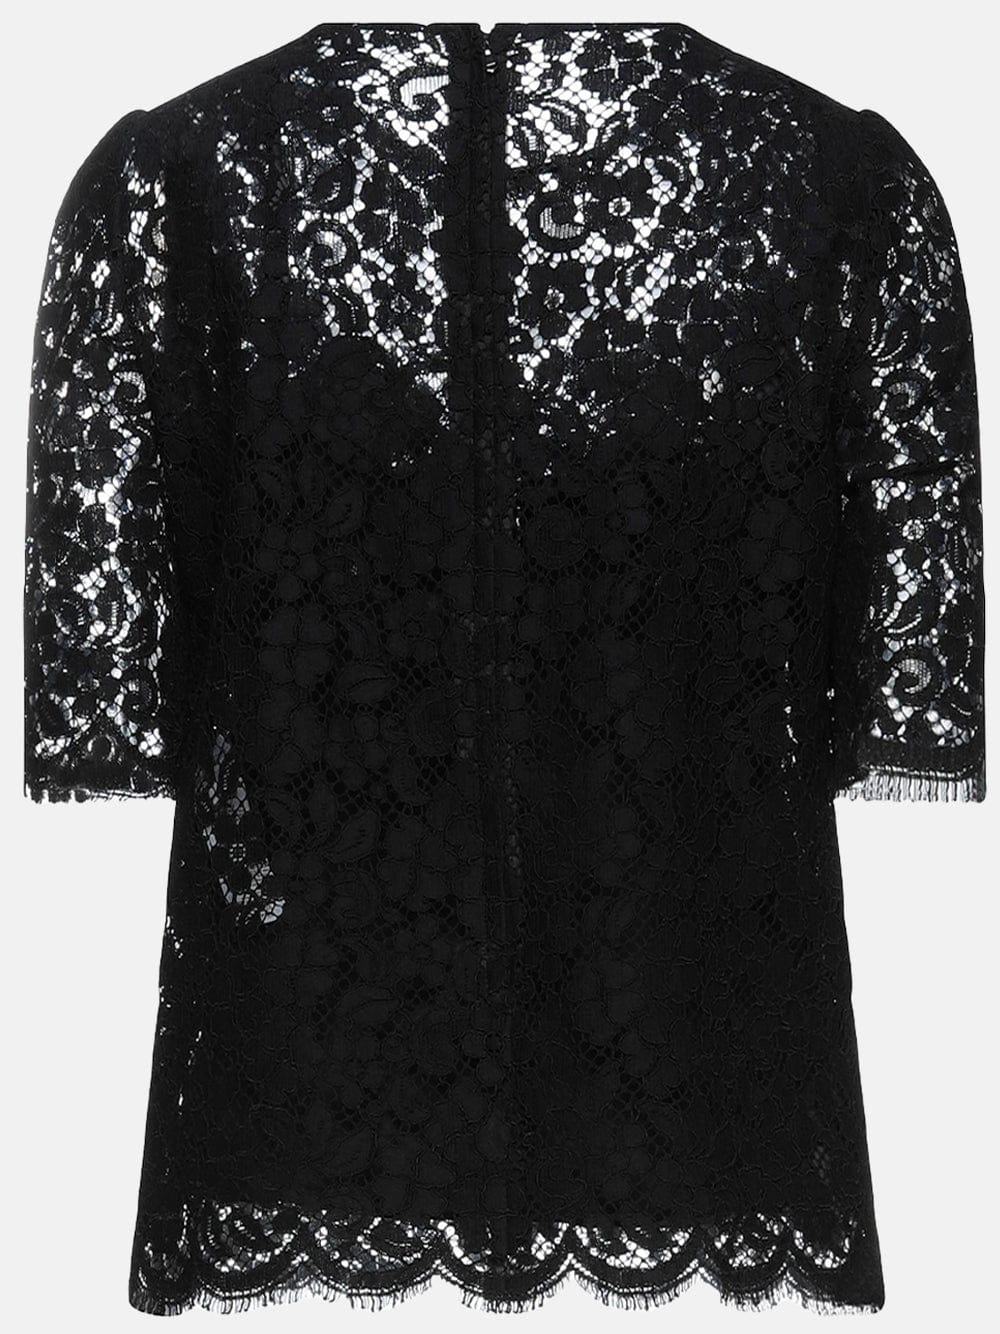 Dolce & Gabbana Embroidered Lace Blouse